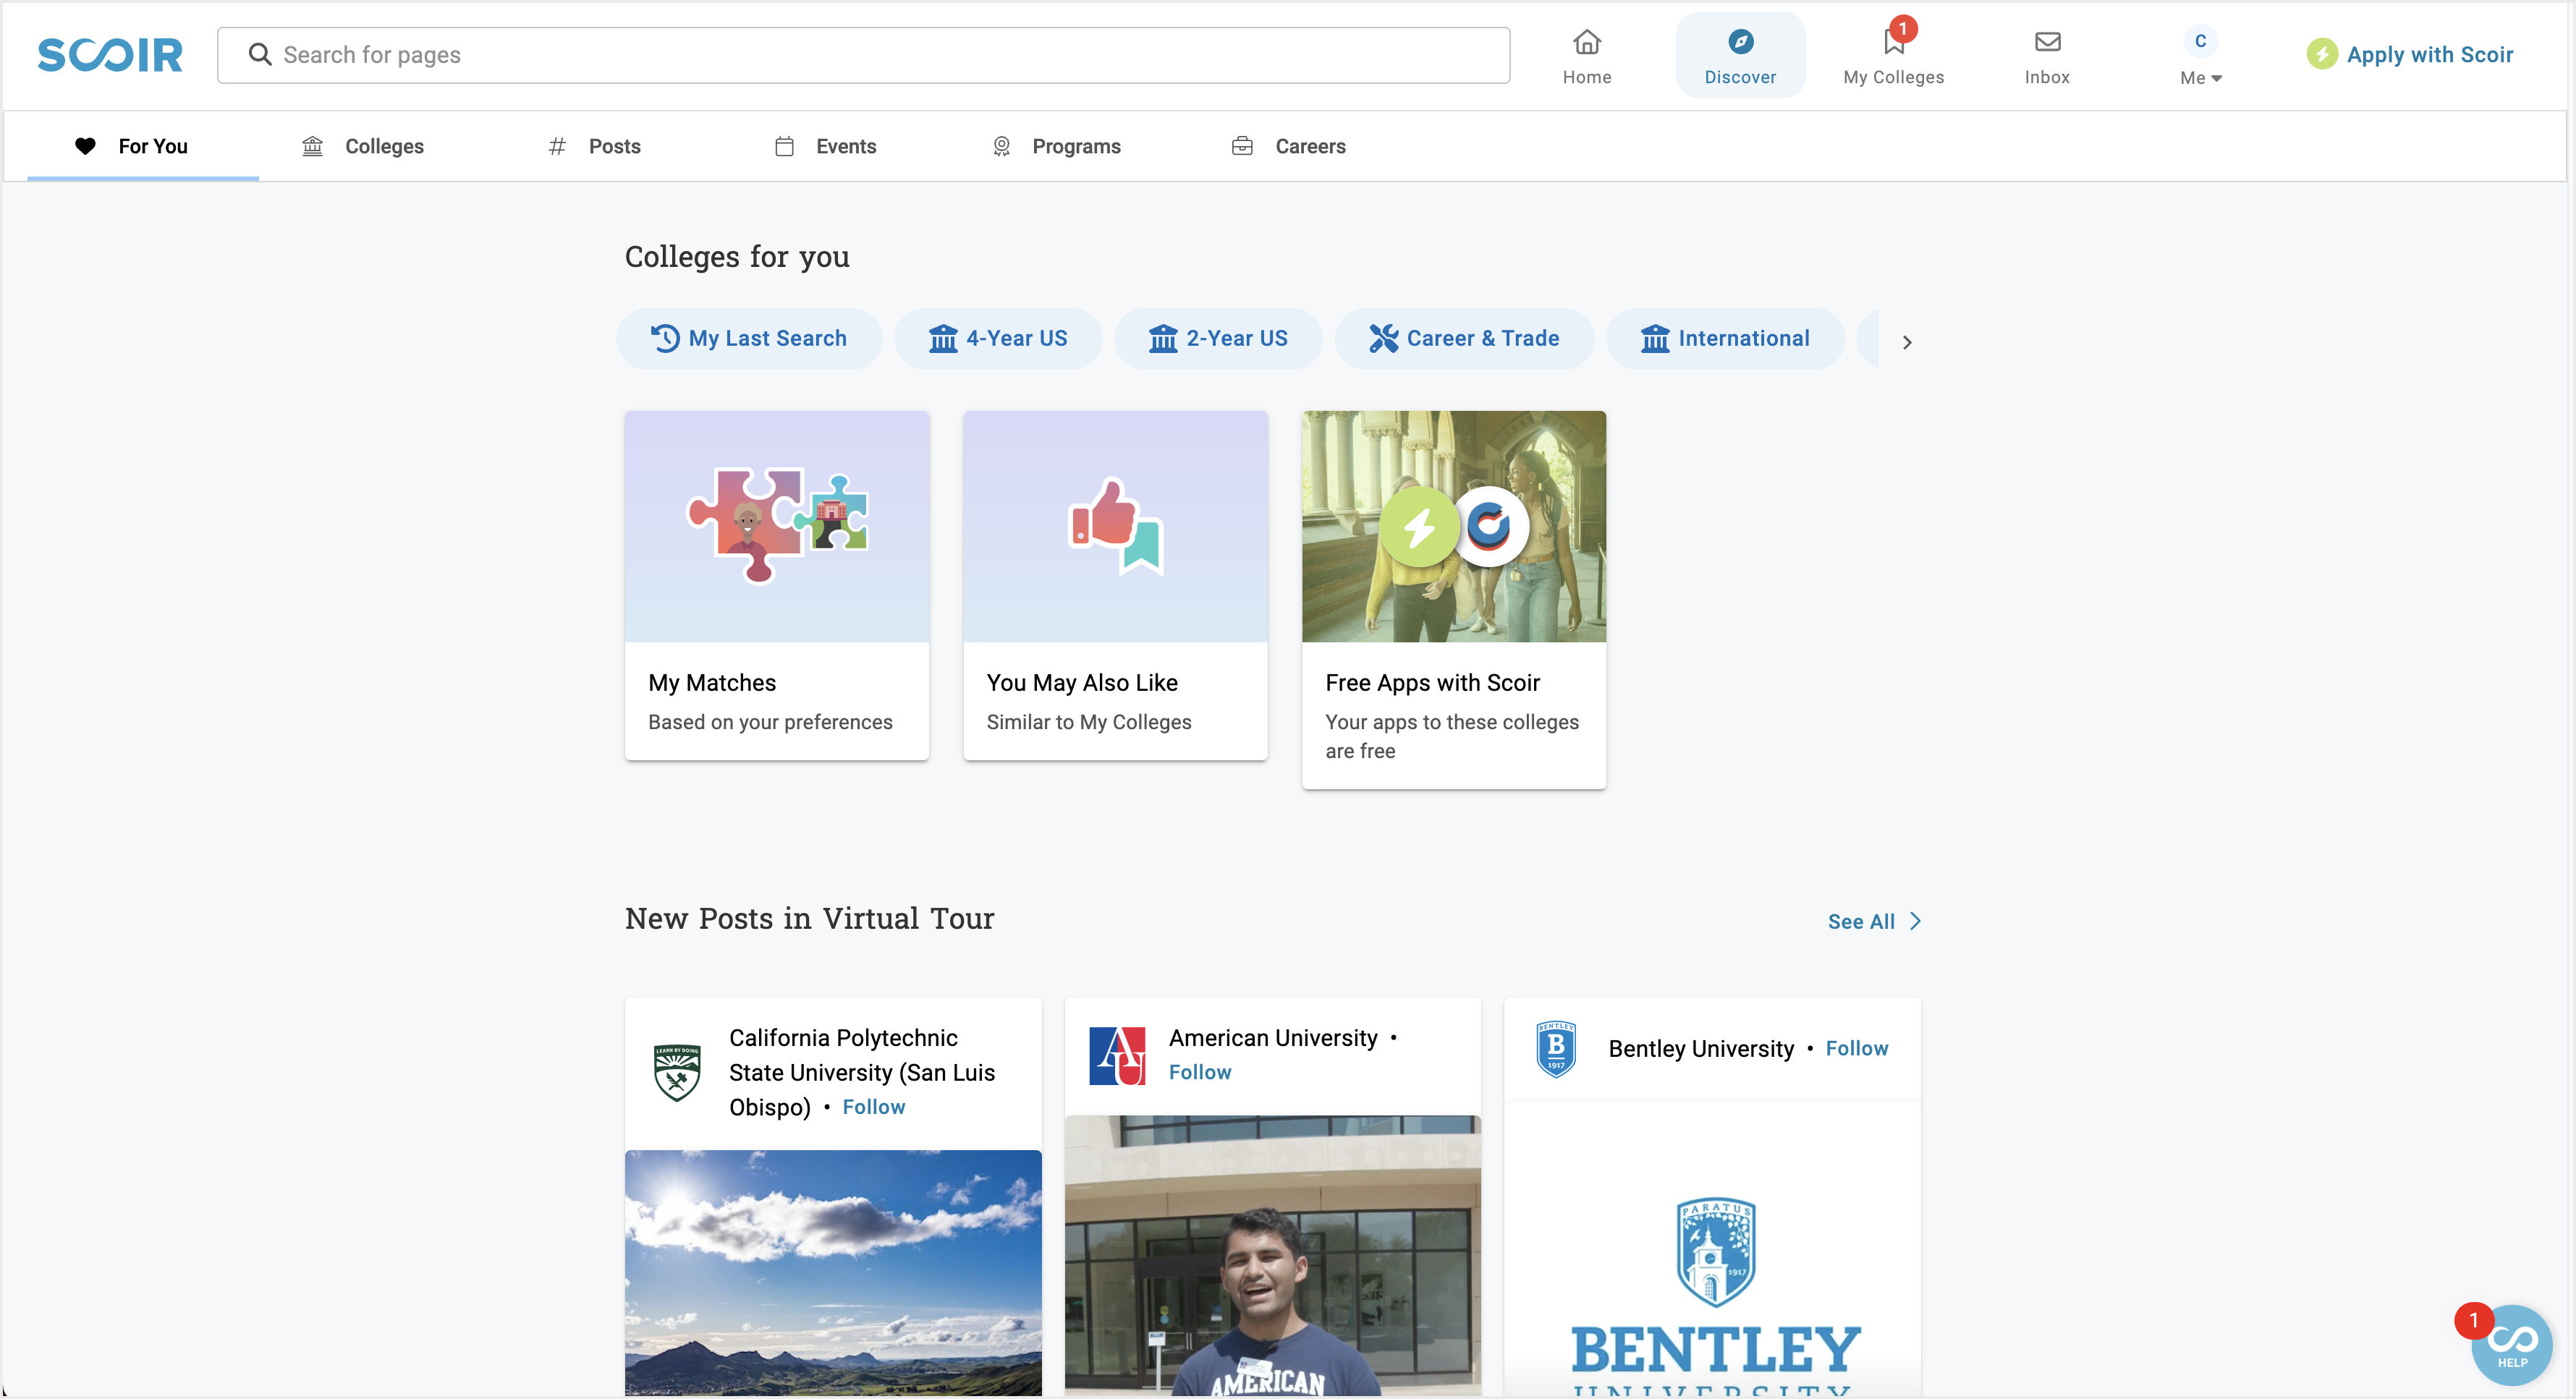 For Students: Discover Colleges - For You